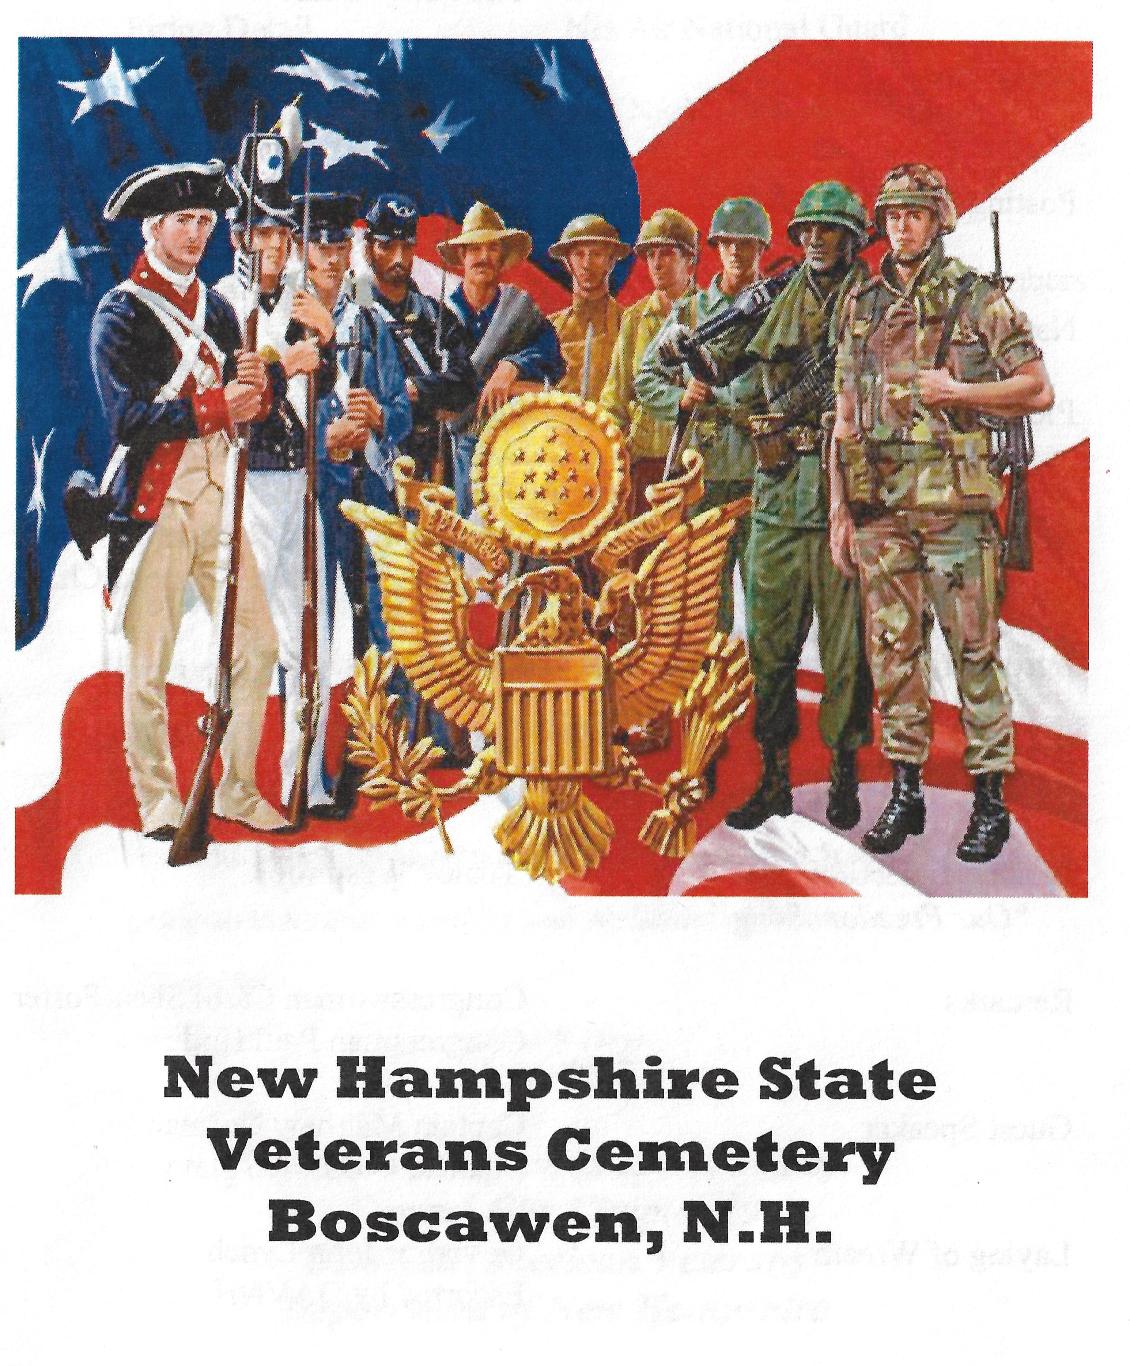 Memorial Day Program at the NH State Veterans Cemetery 2010